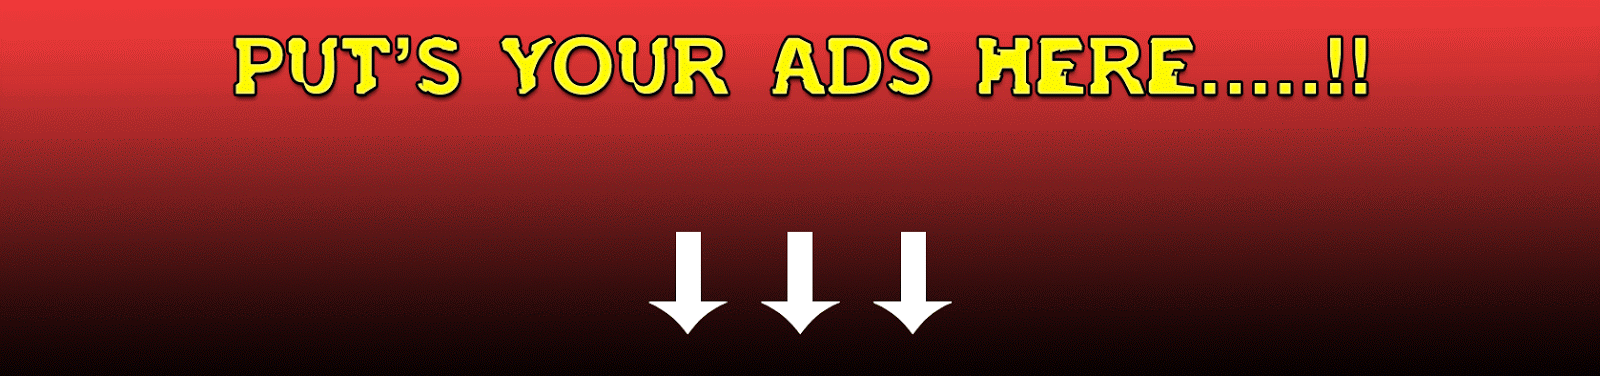 Space ads